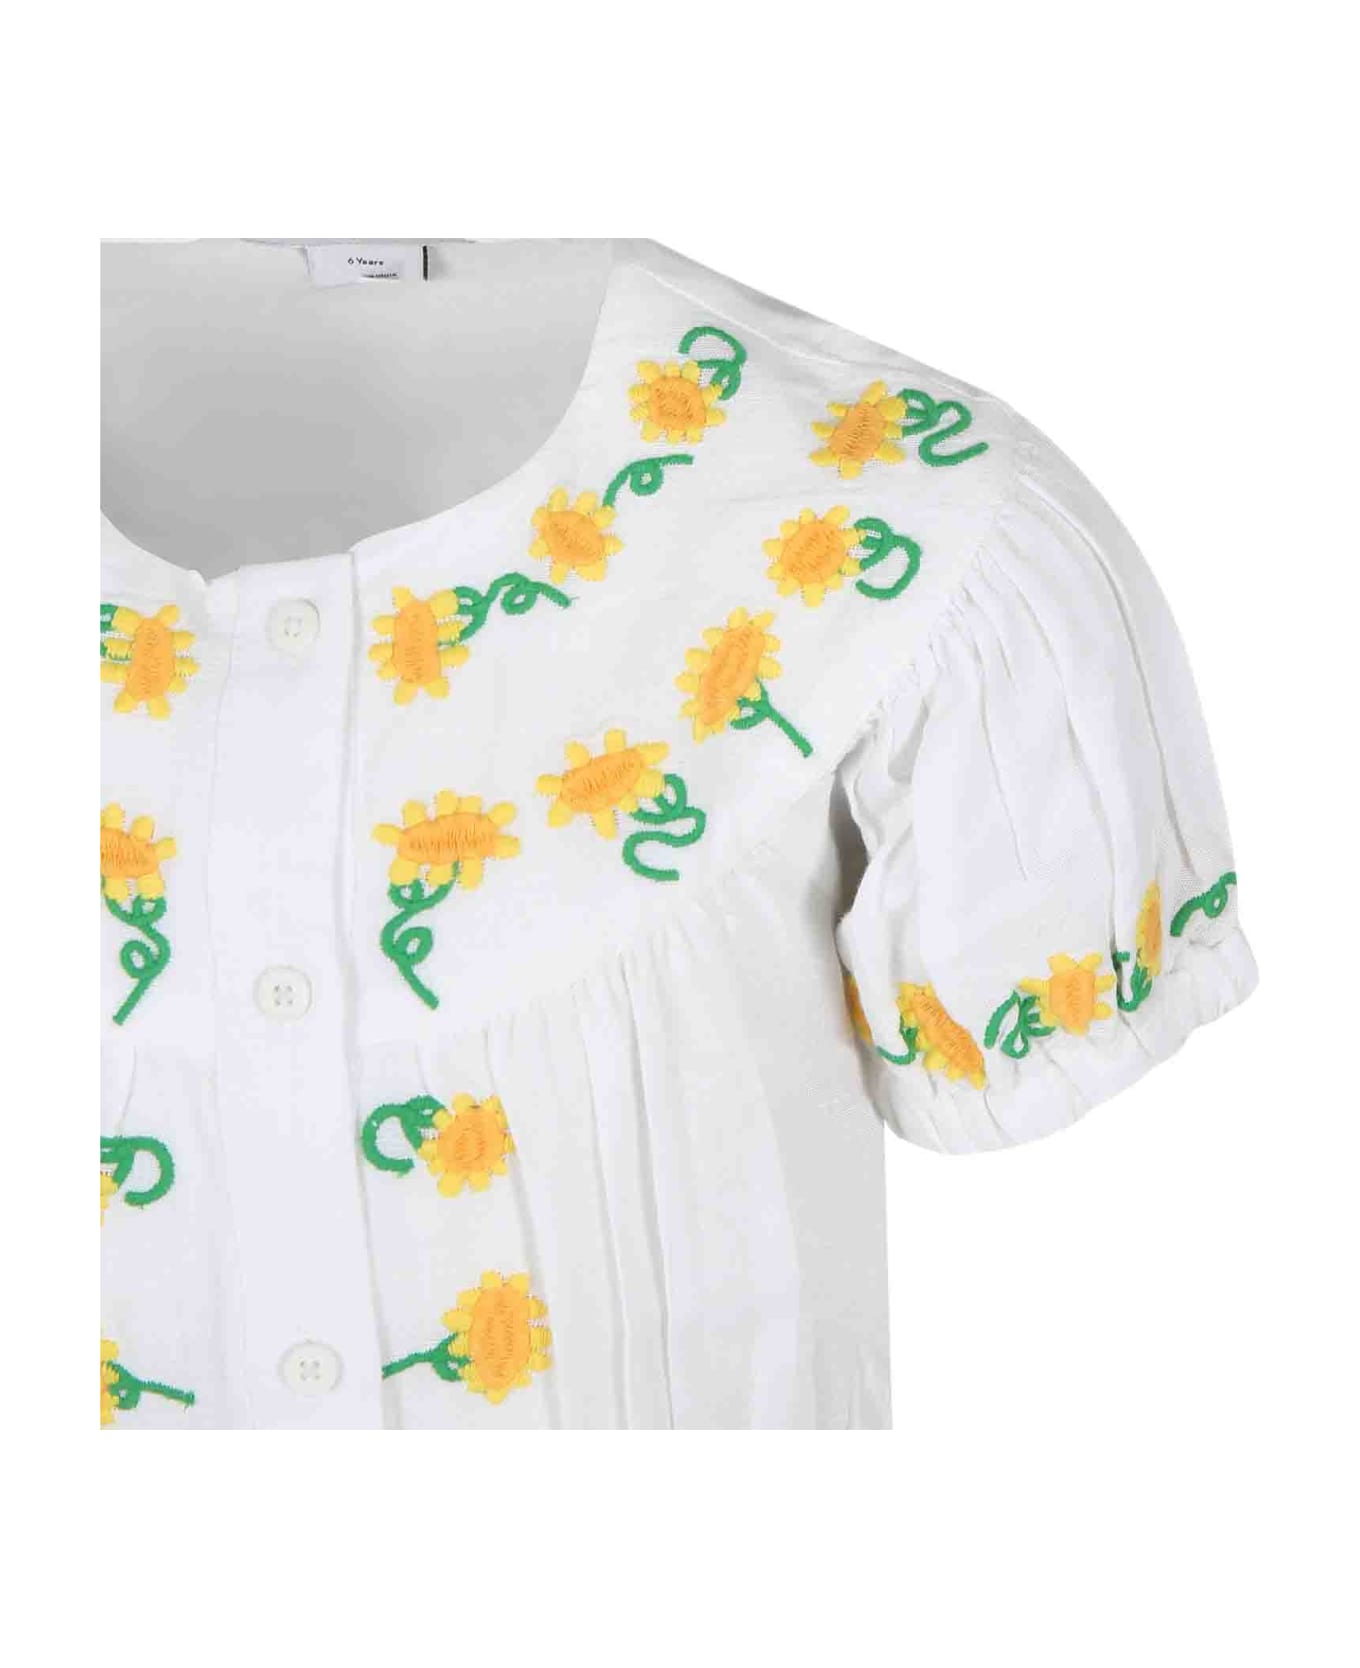 Stella McCartney Kids White Dress For Girl With Embroidered Sunflowers - White